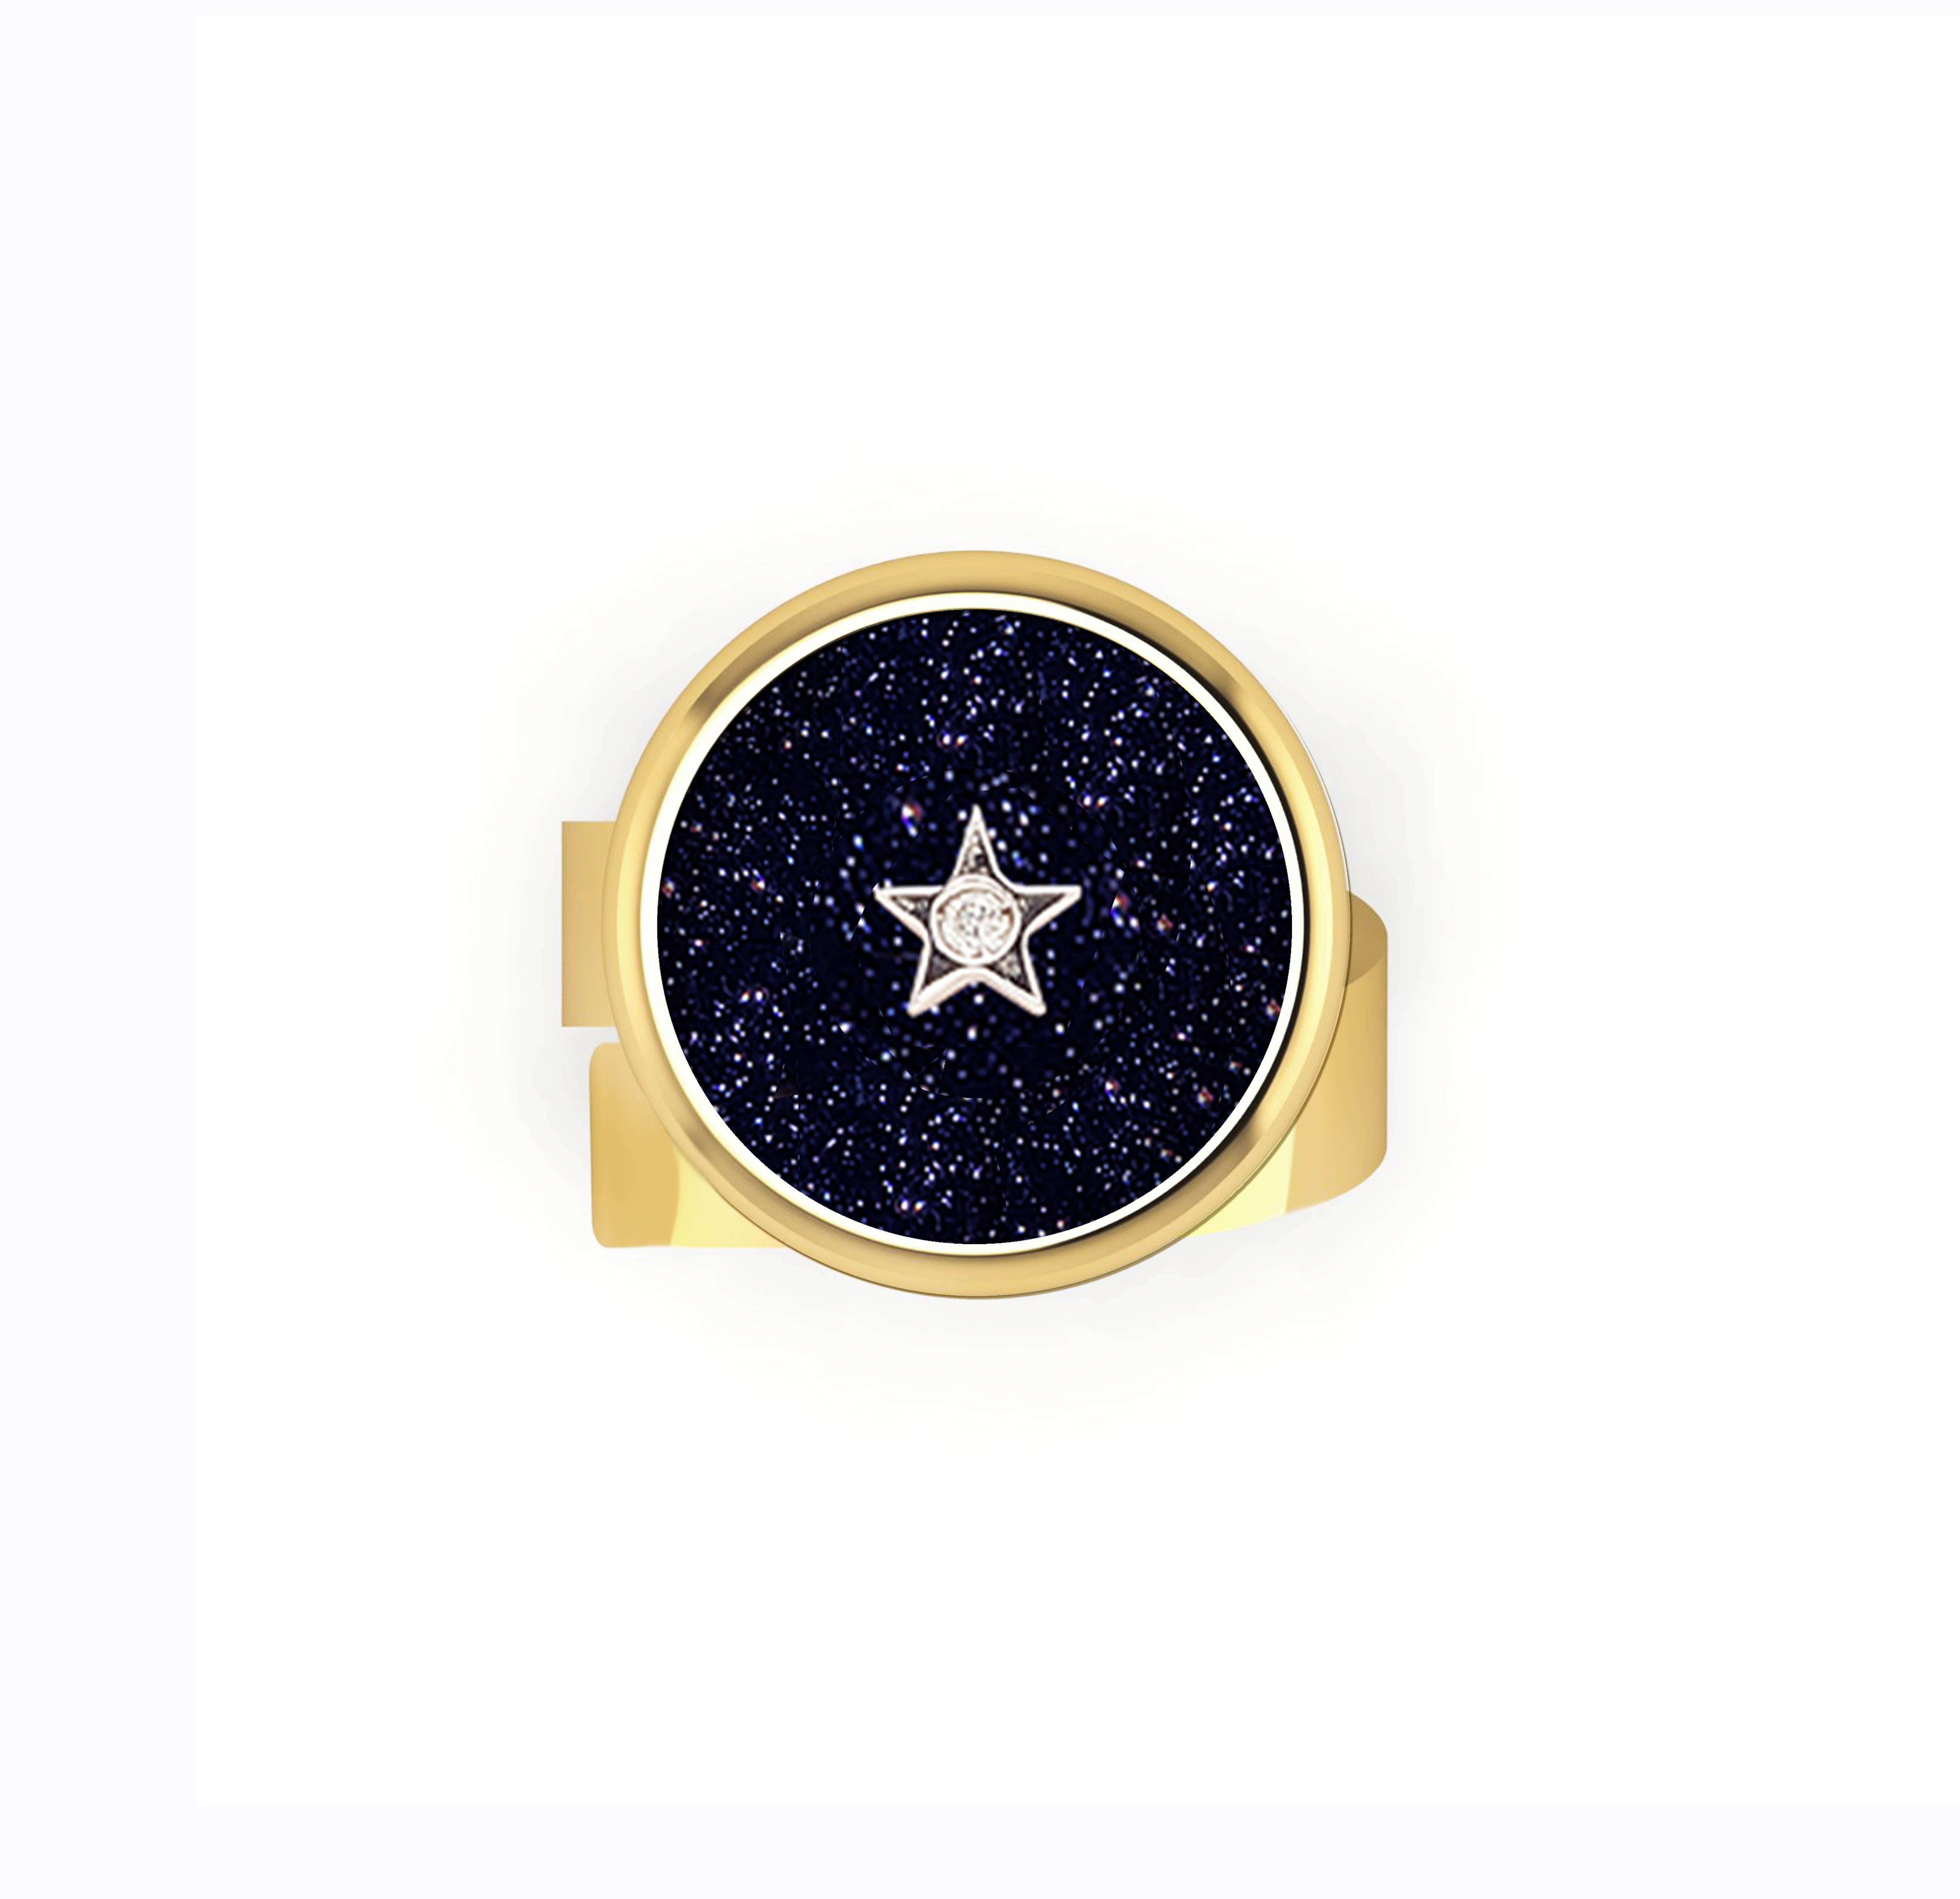 O R A Midnight Collection.
This ring expresses mistery and magic through a beautiful blue sky full of stars.
Aventurine is a scintillating glass “discovered” by chance by Italian glassblowers in Venice in the seventeenth century, who discovered it